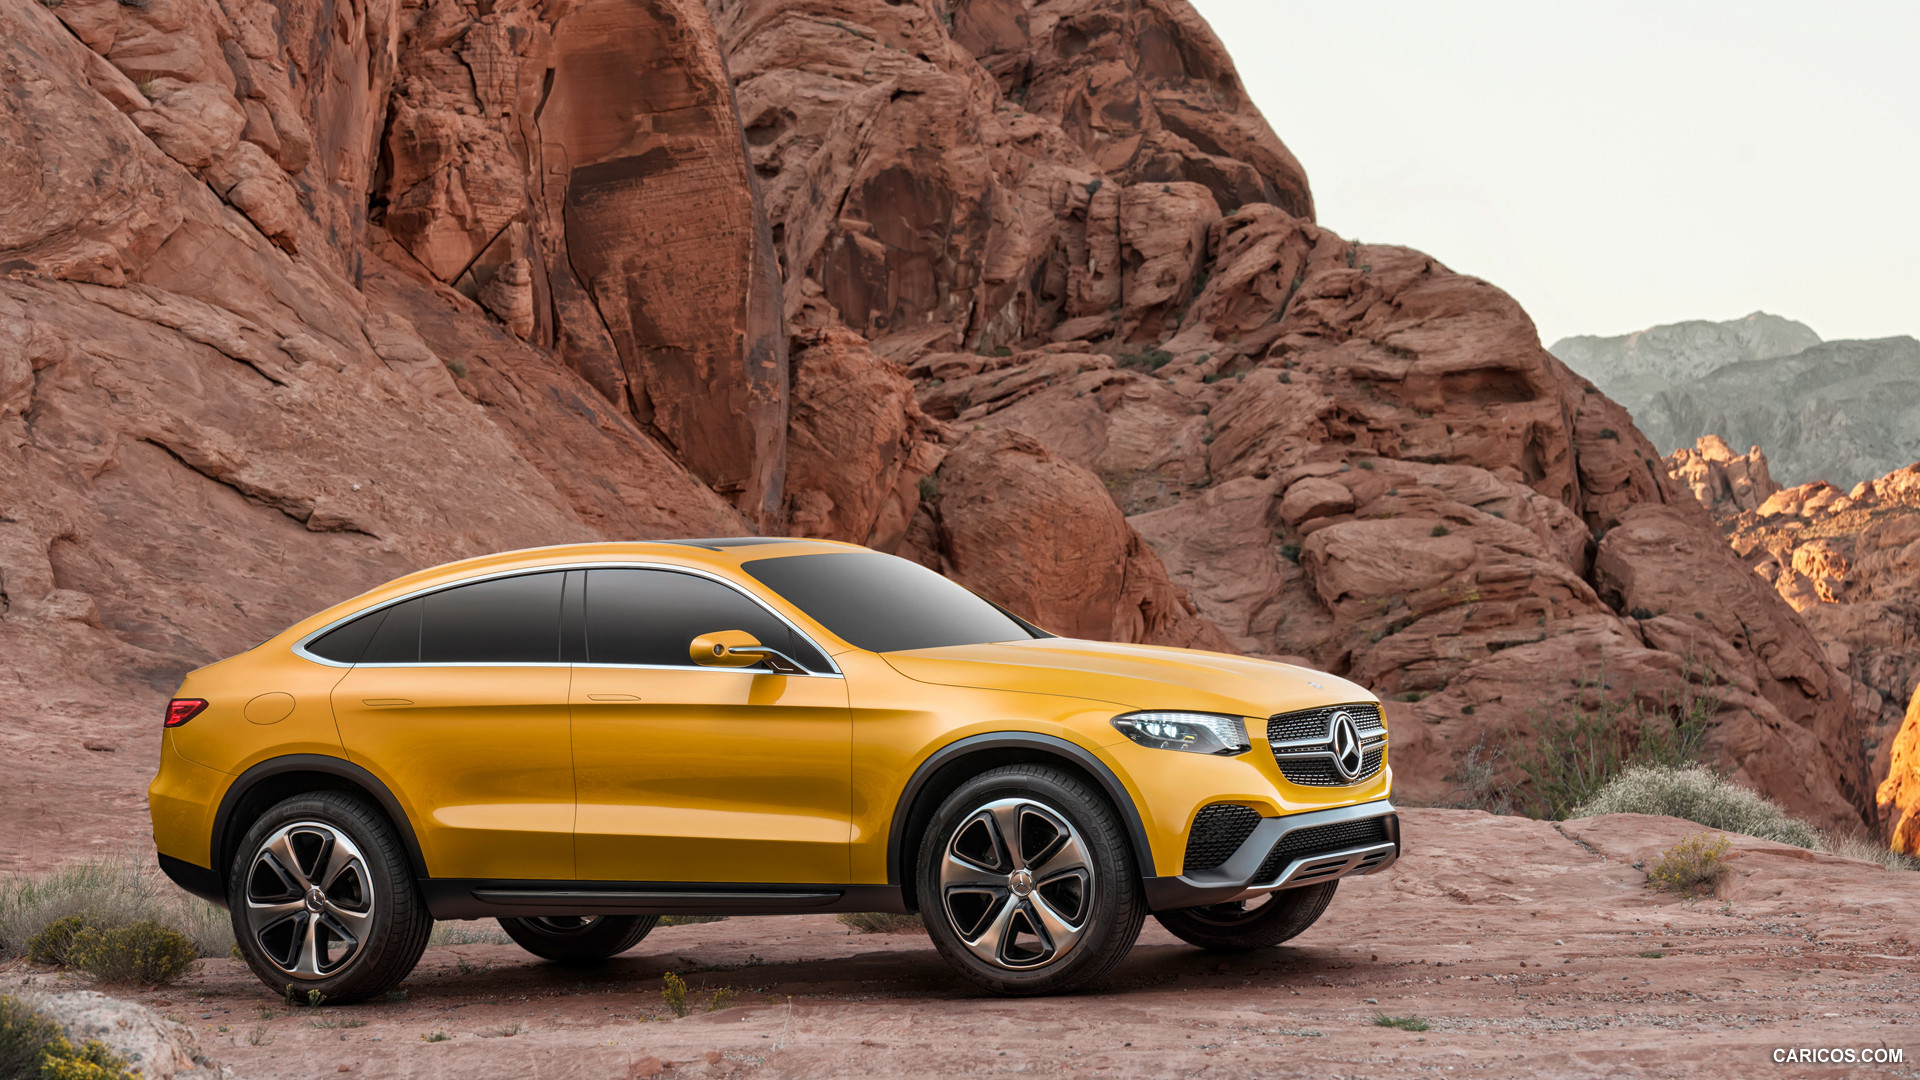 2015 Mercedes-Benz GLC Coupe Concept  - Side, #2 of 16